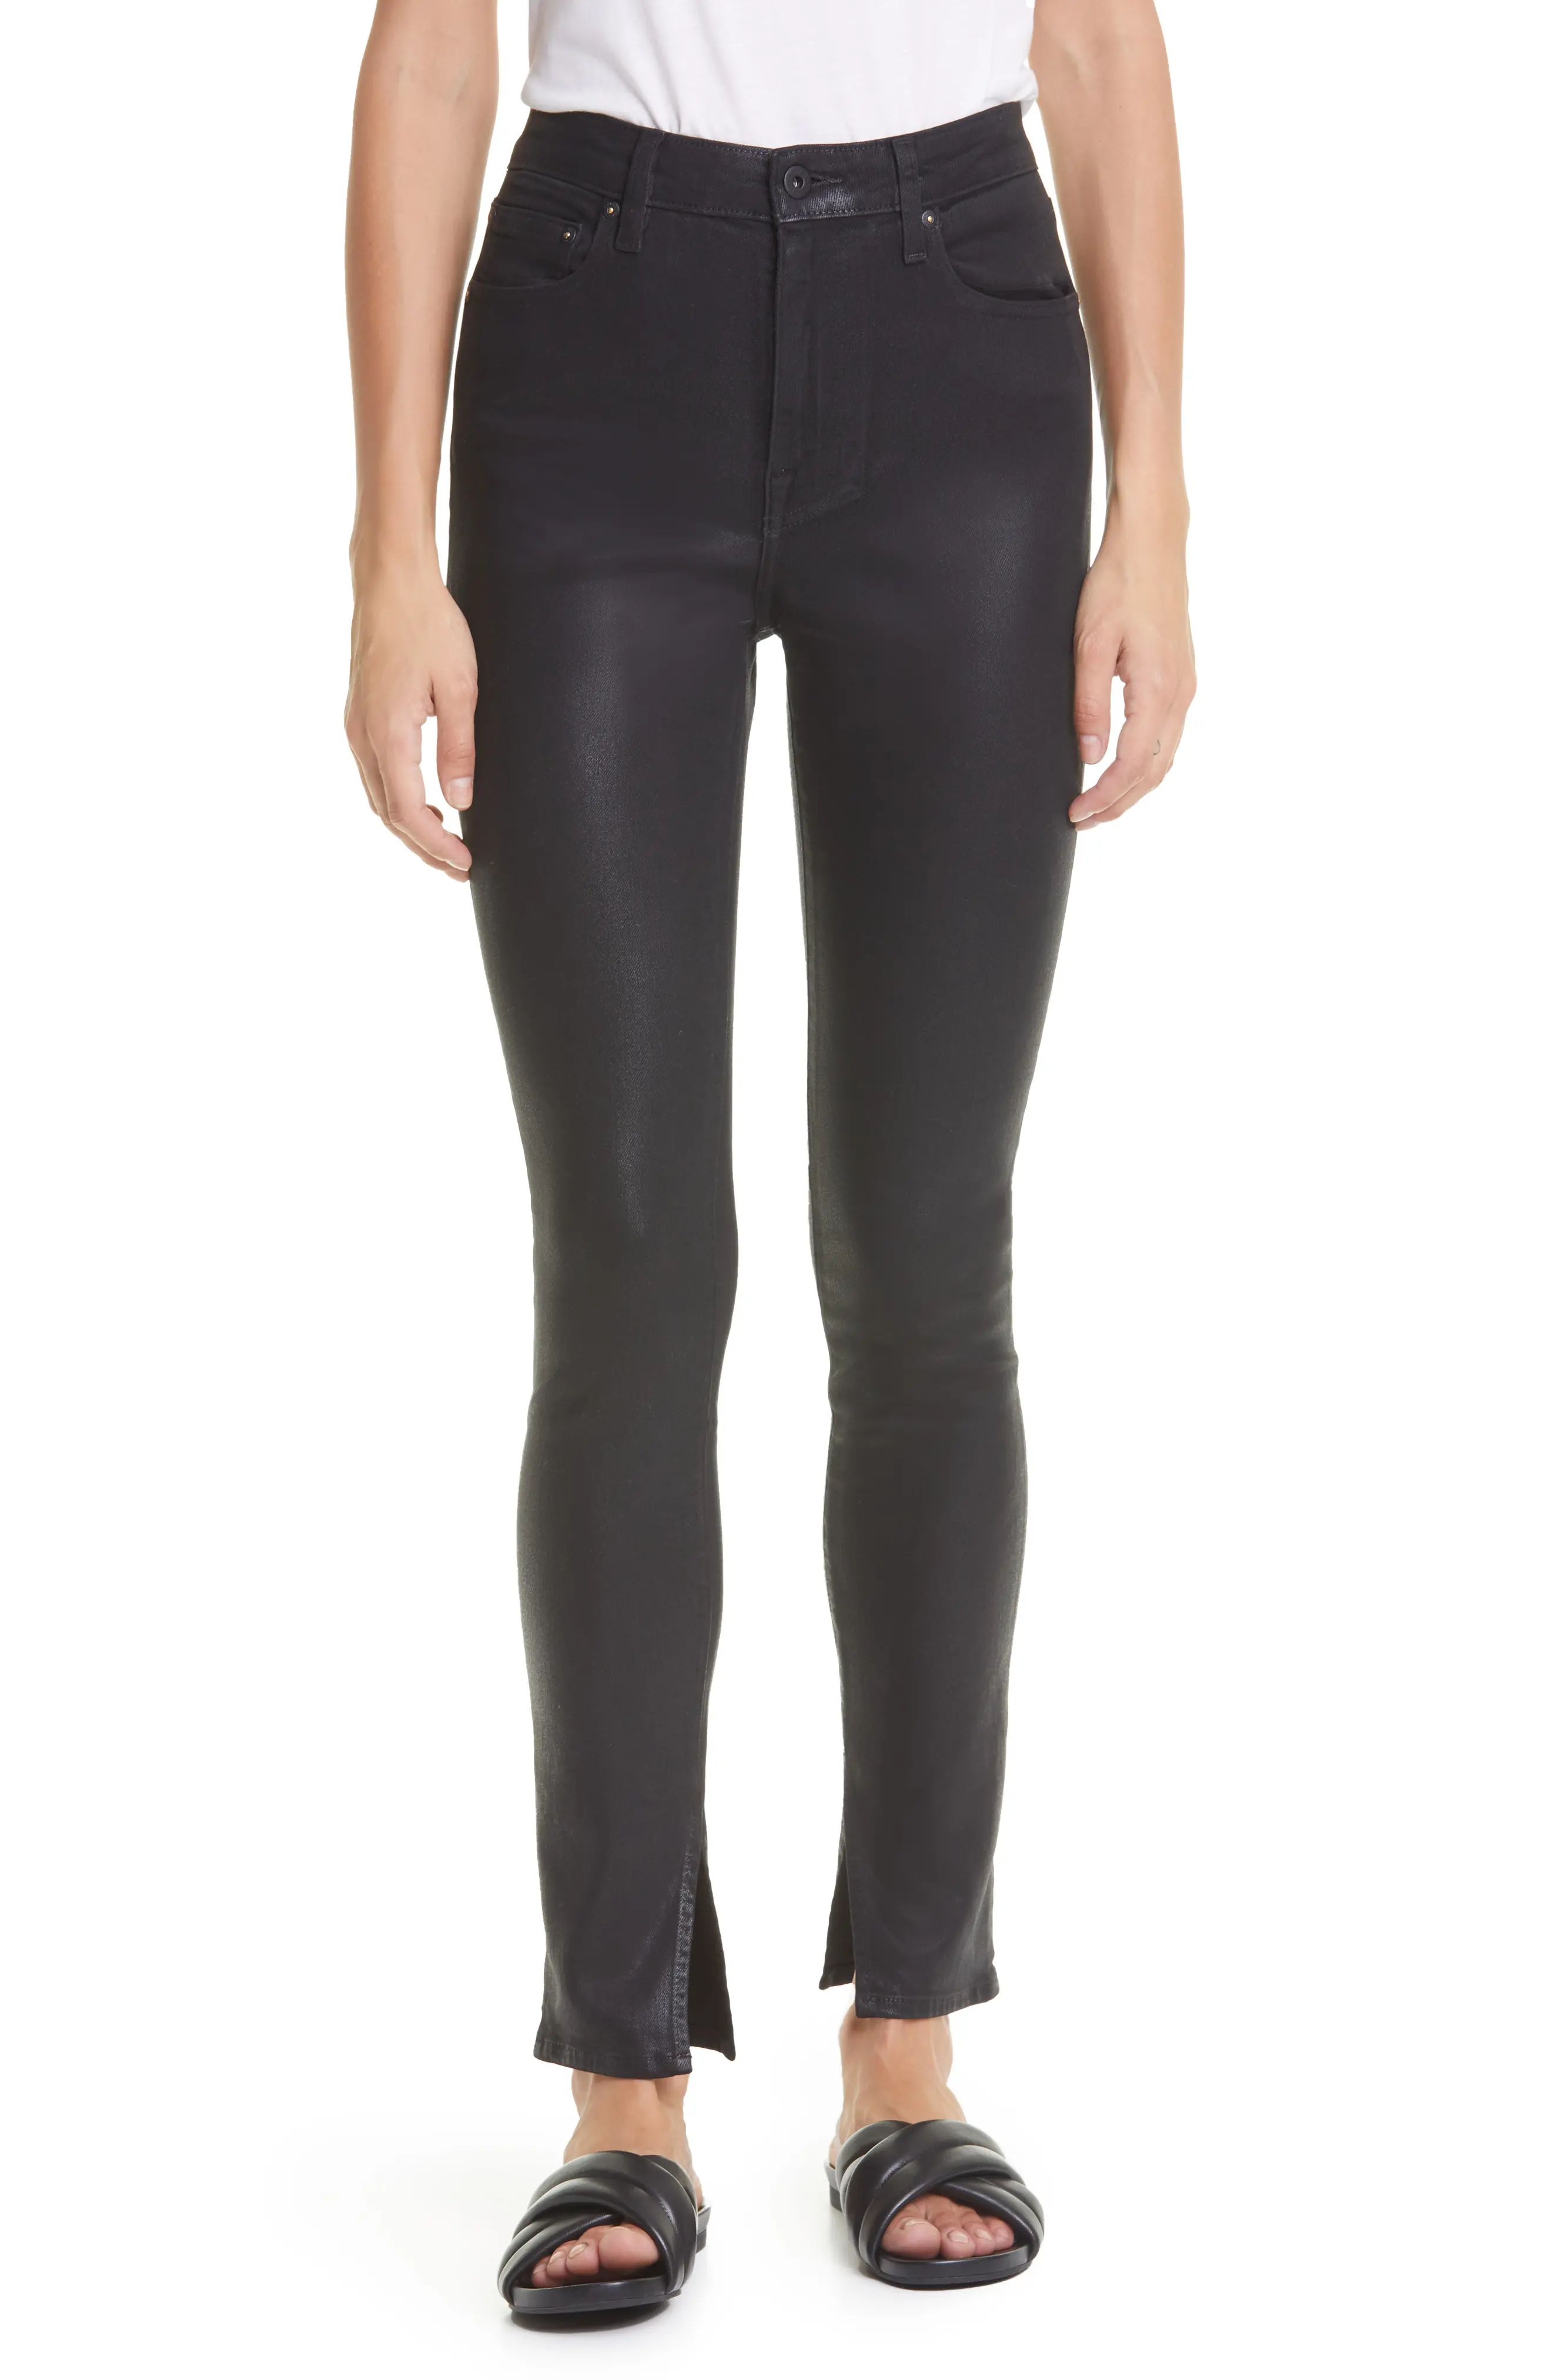 Jonathan Simkhai Standard Rae Coated Stretch Ankle Skinny Jeans in Coated Black at Nordstrom, Size 2 | Nordstrom